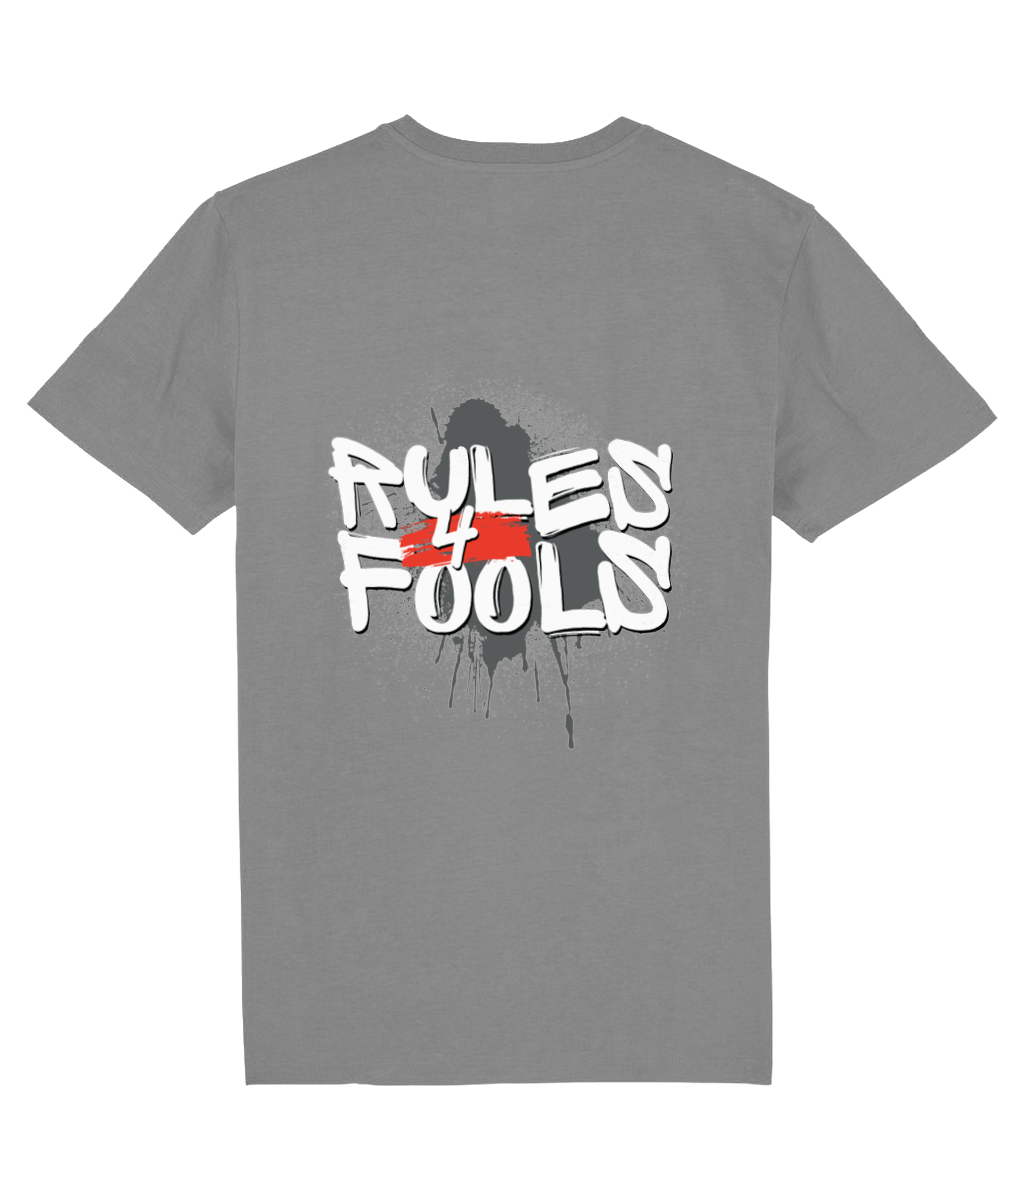 Rules For Fools - Tee - 5 Colours